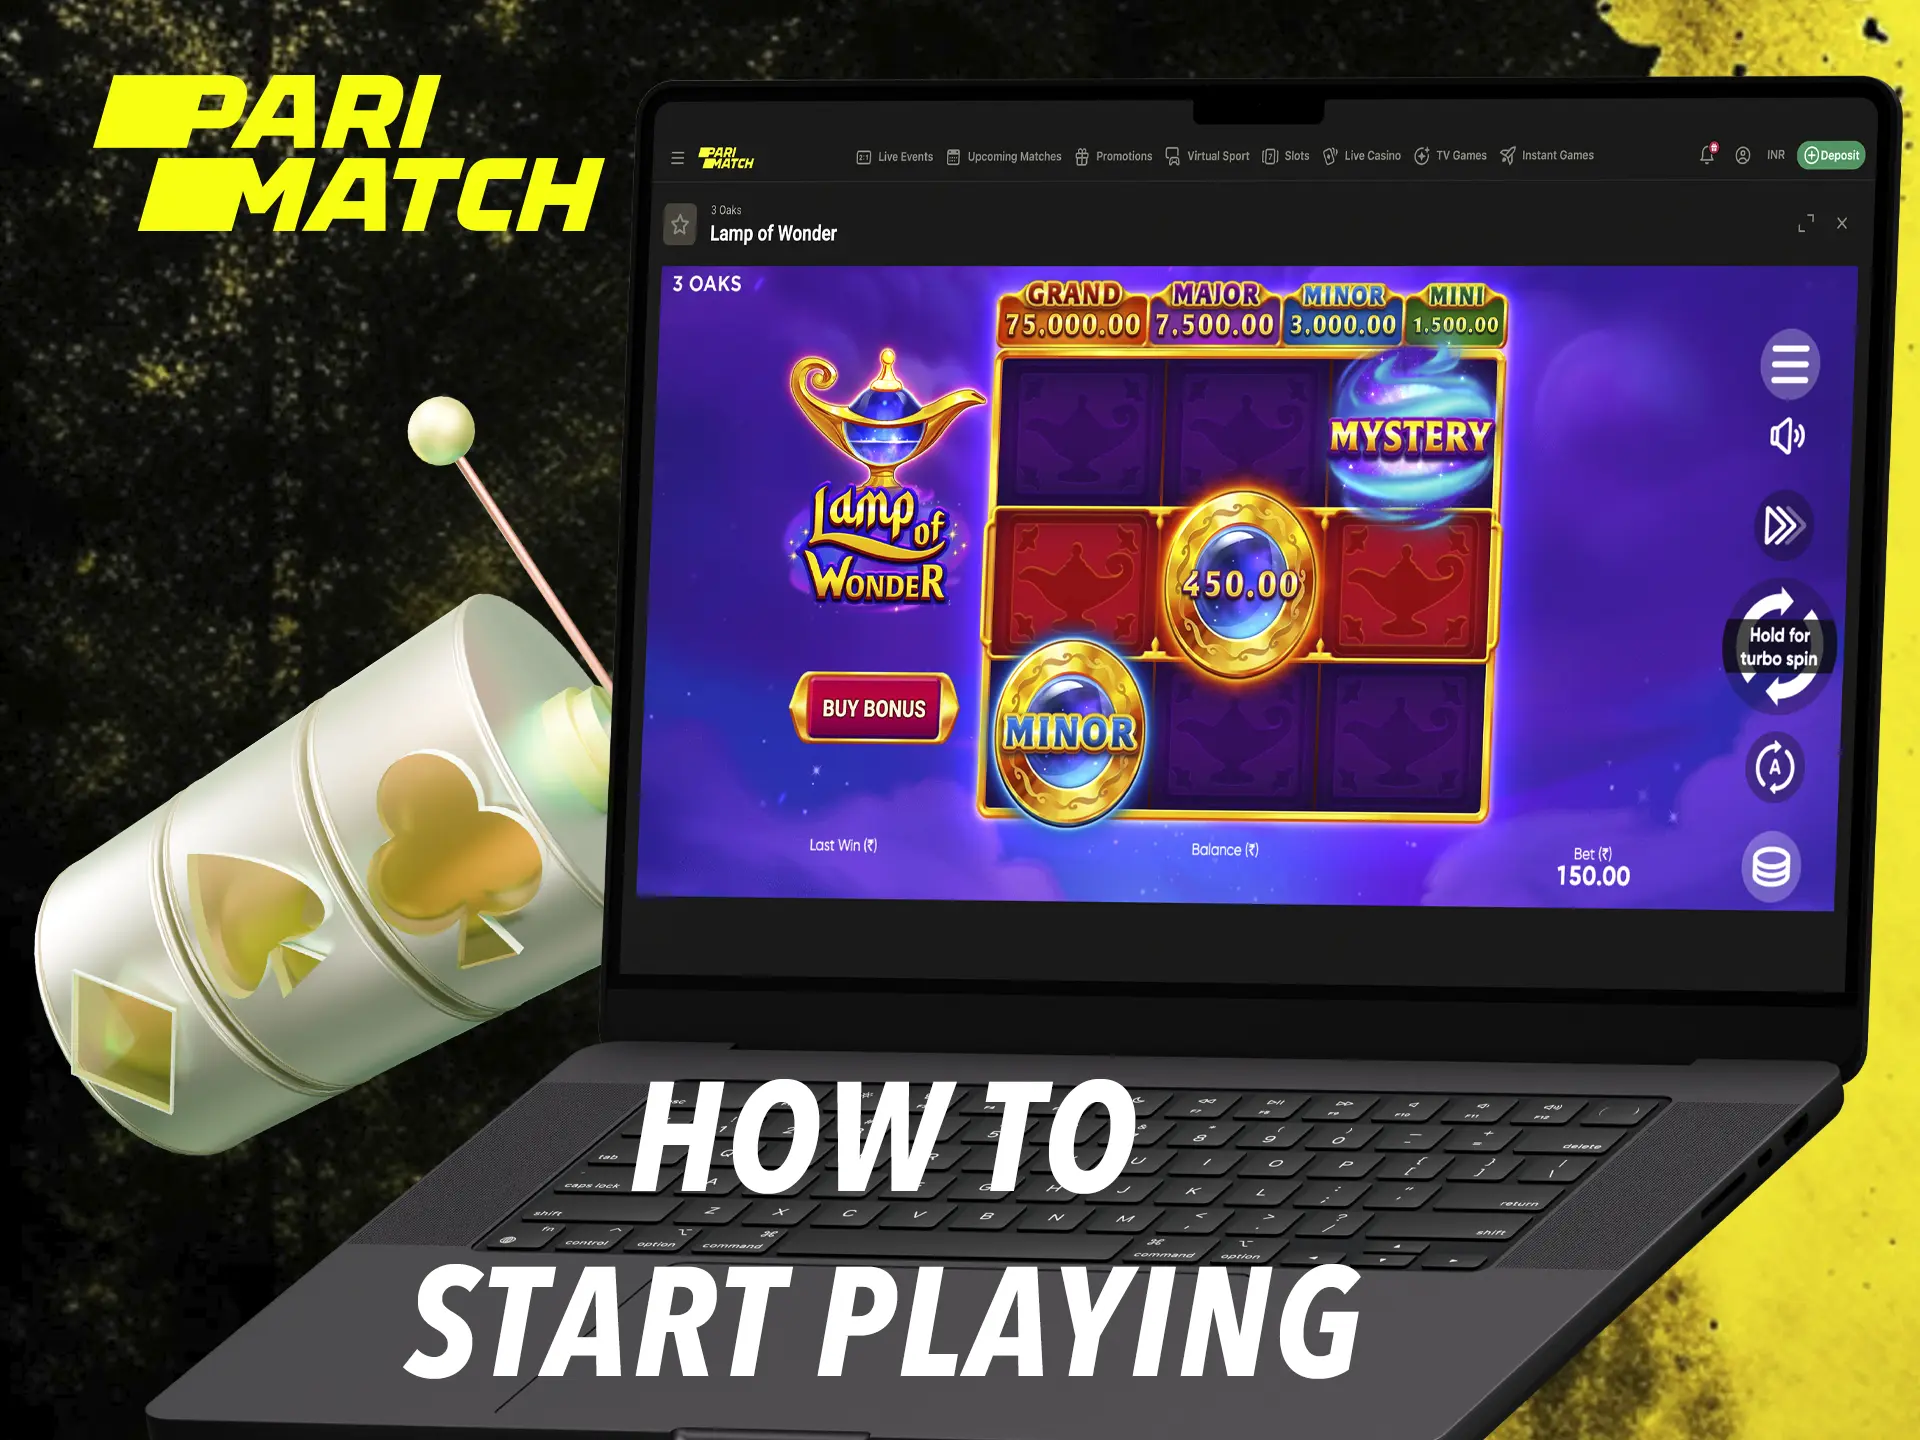 Start your introduction to Parimatch slots using the demo mode where you will gain experience and confidence.